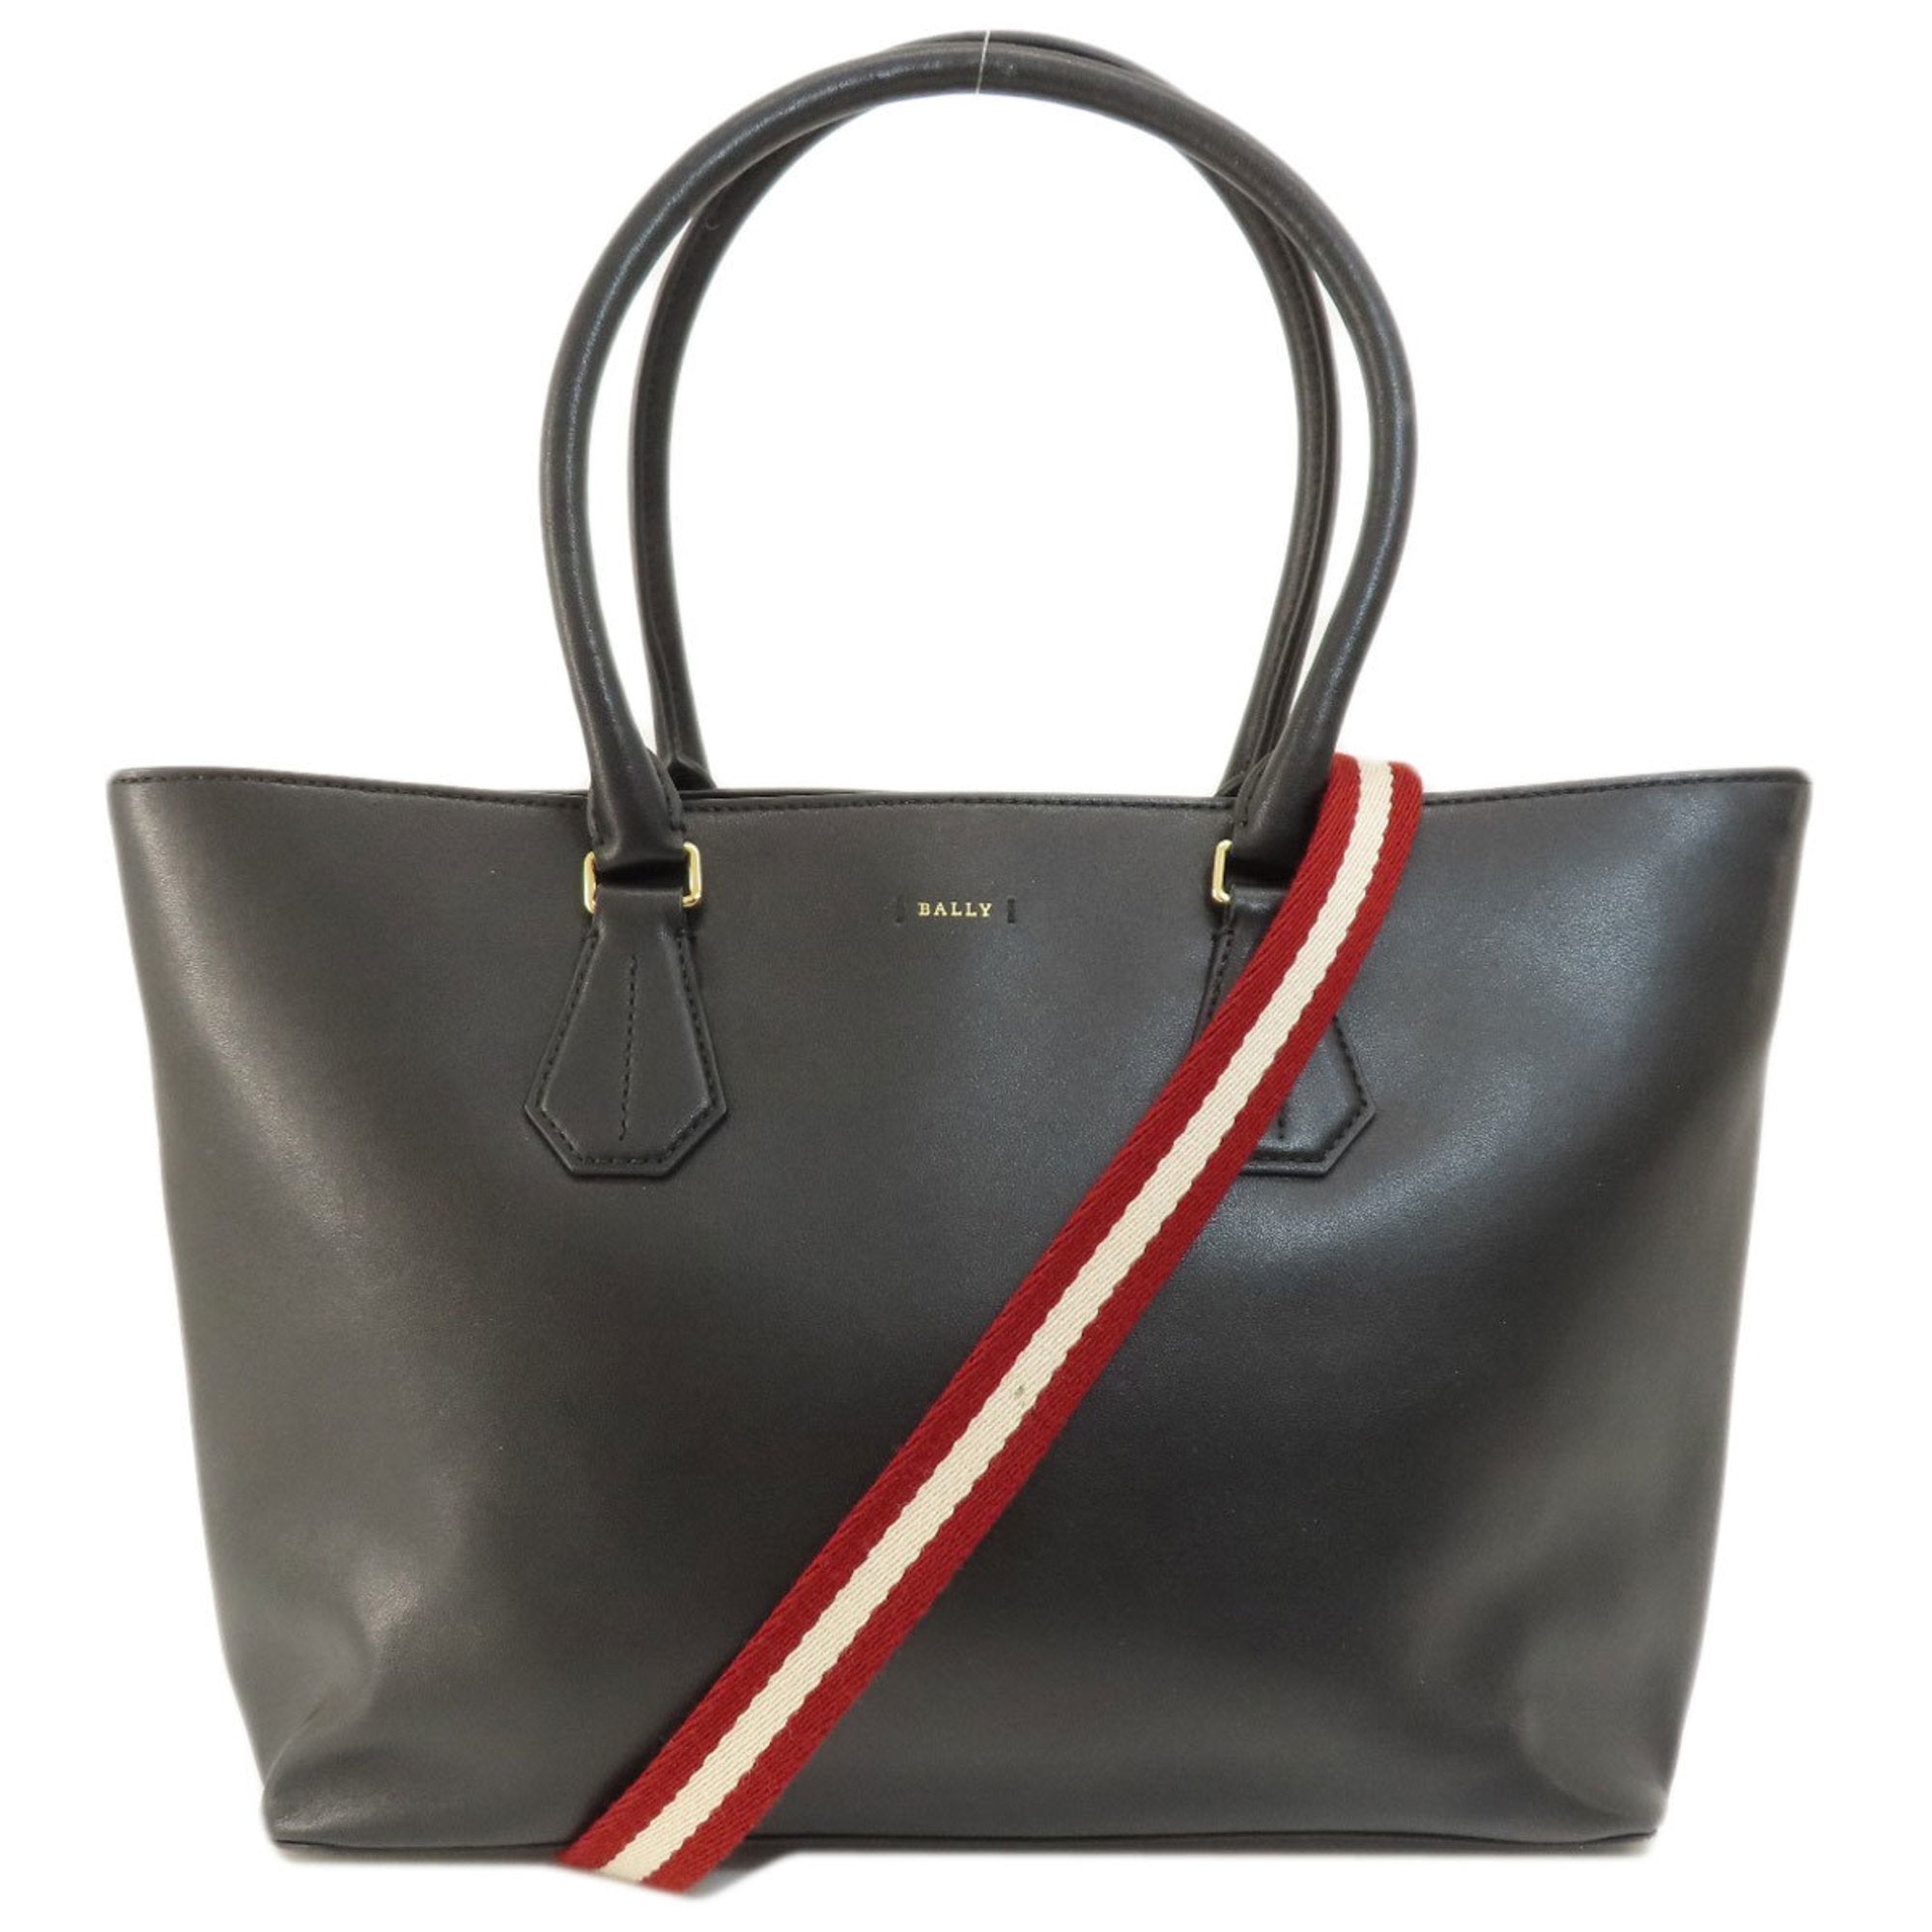 Tote Bag Leather Women's